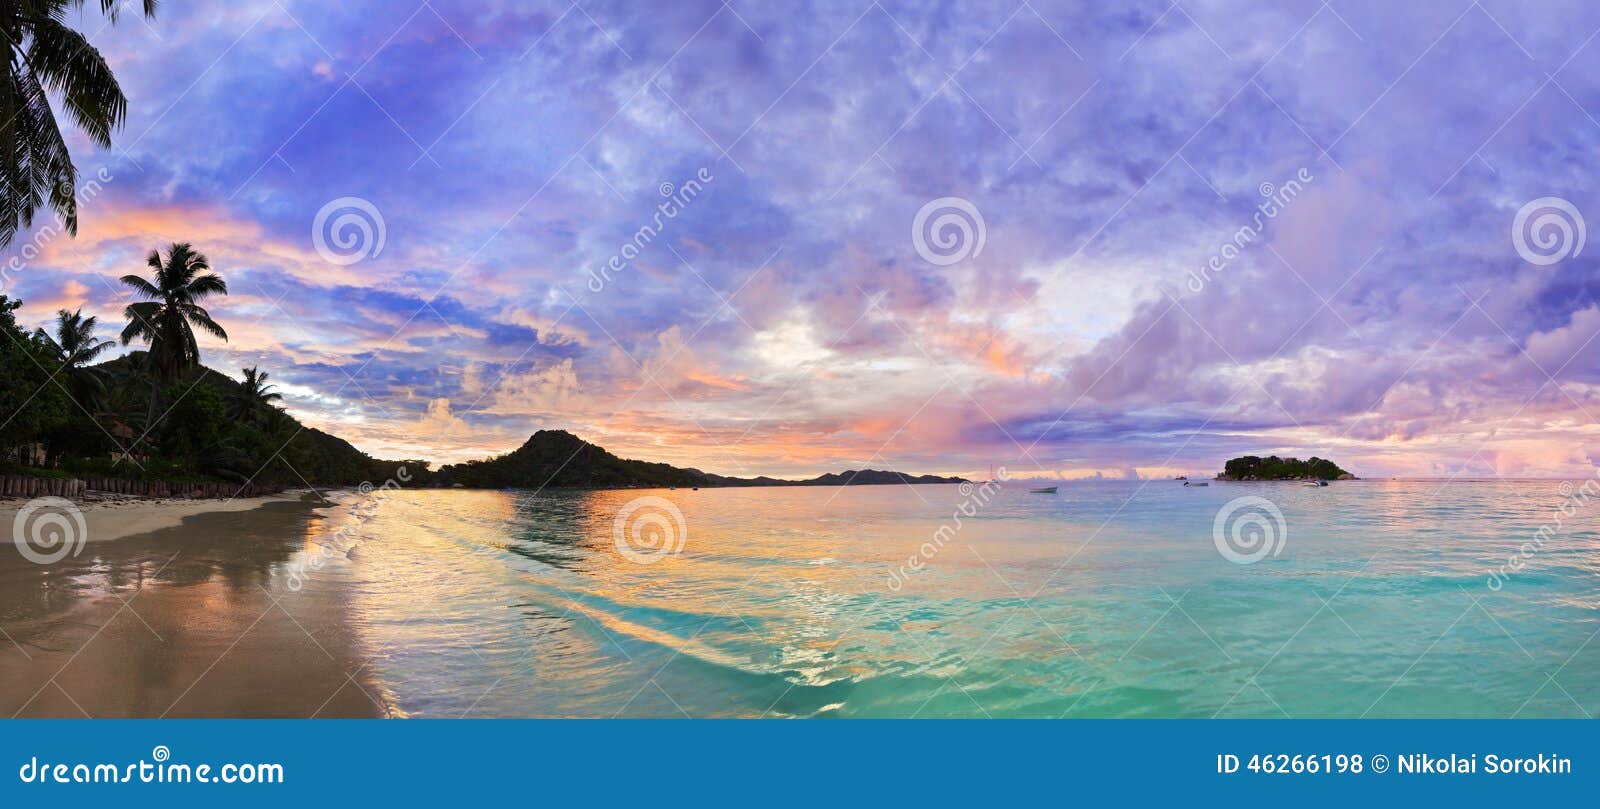 tropical beach cote d'or at sunset, seychelles